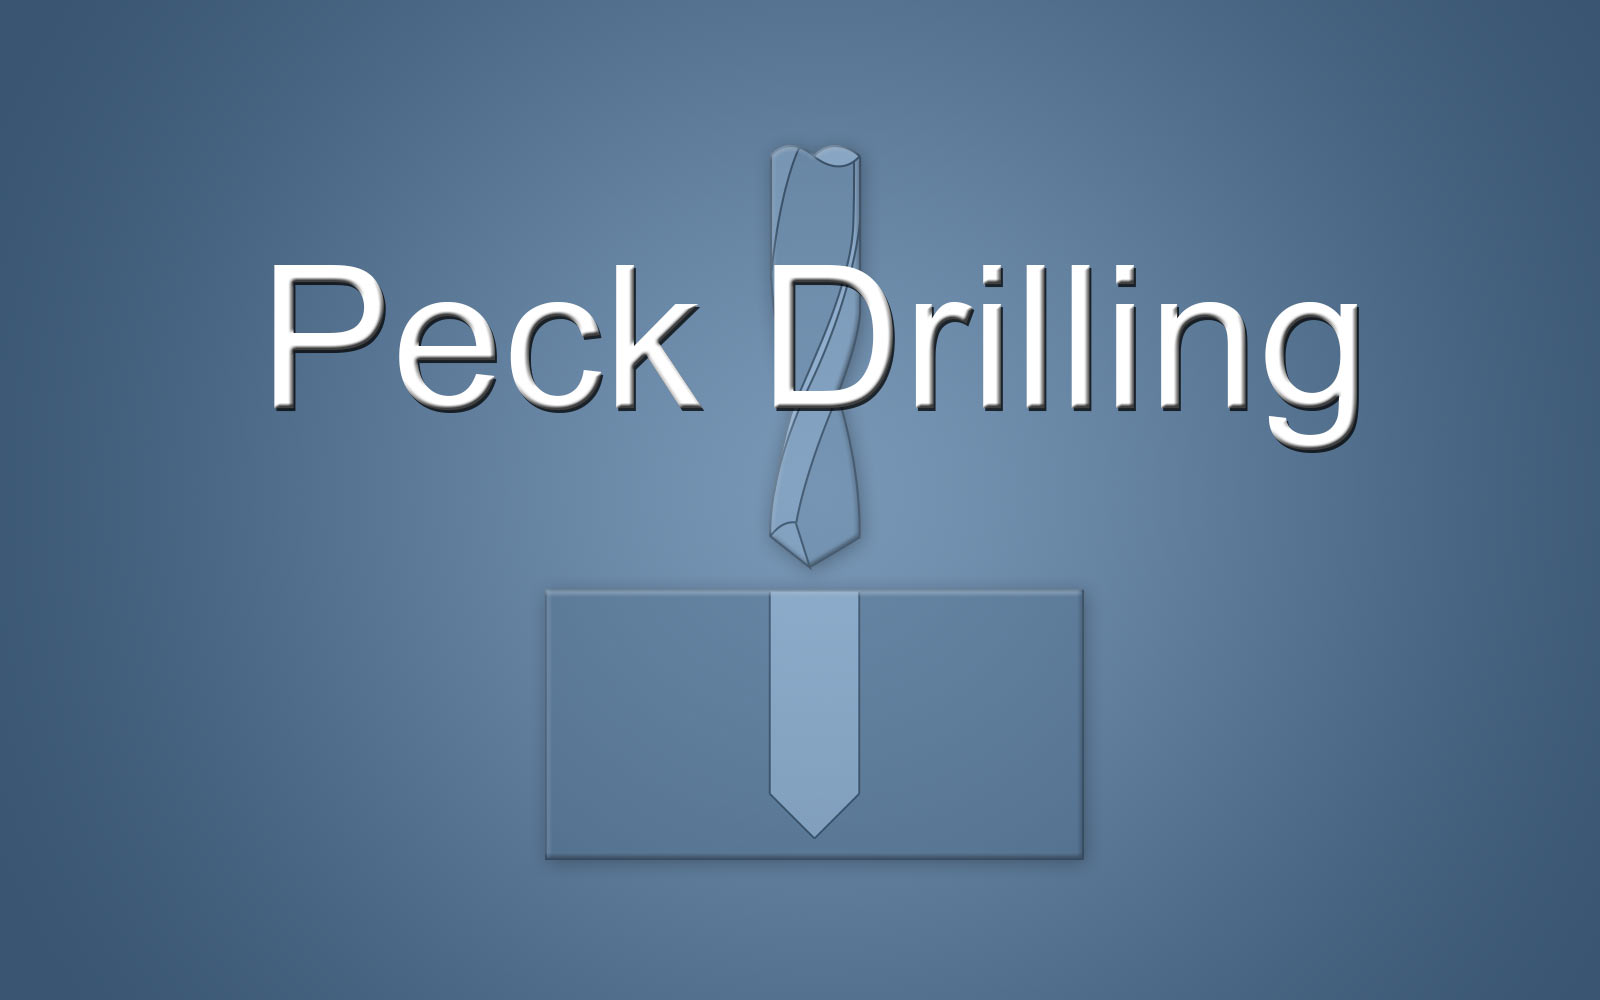 G73 and G83 peck drilling cycles